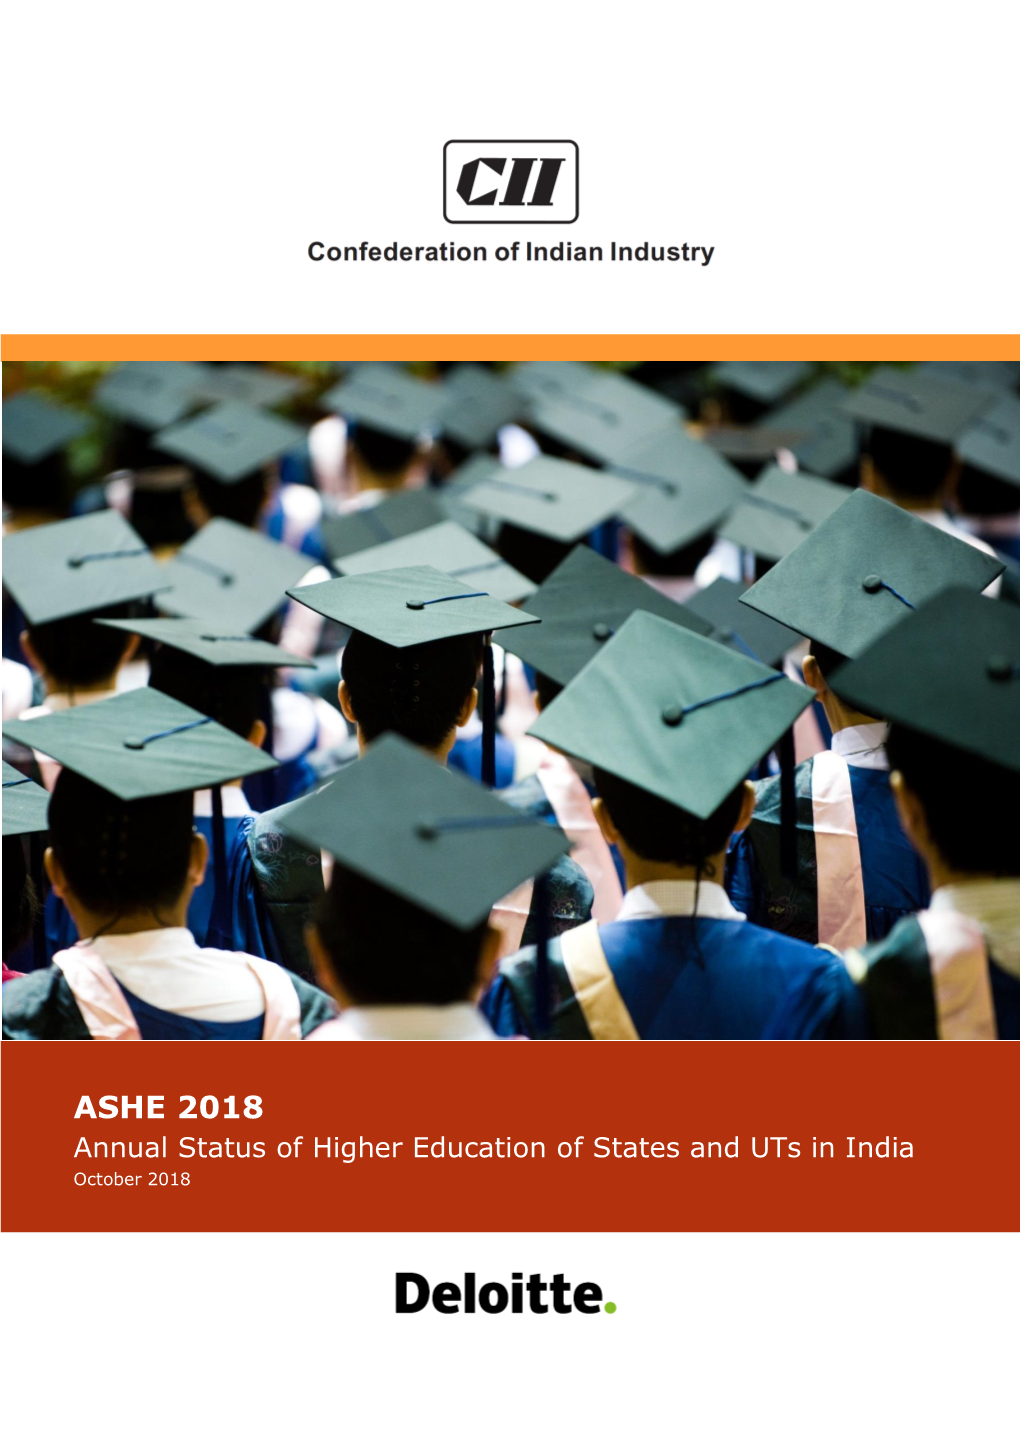 ASHE 2018 Annual Status of Higher Education of States and Uts in India October 2018